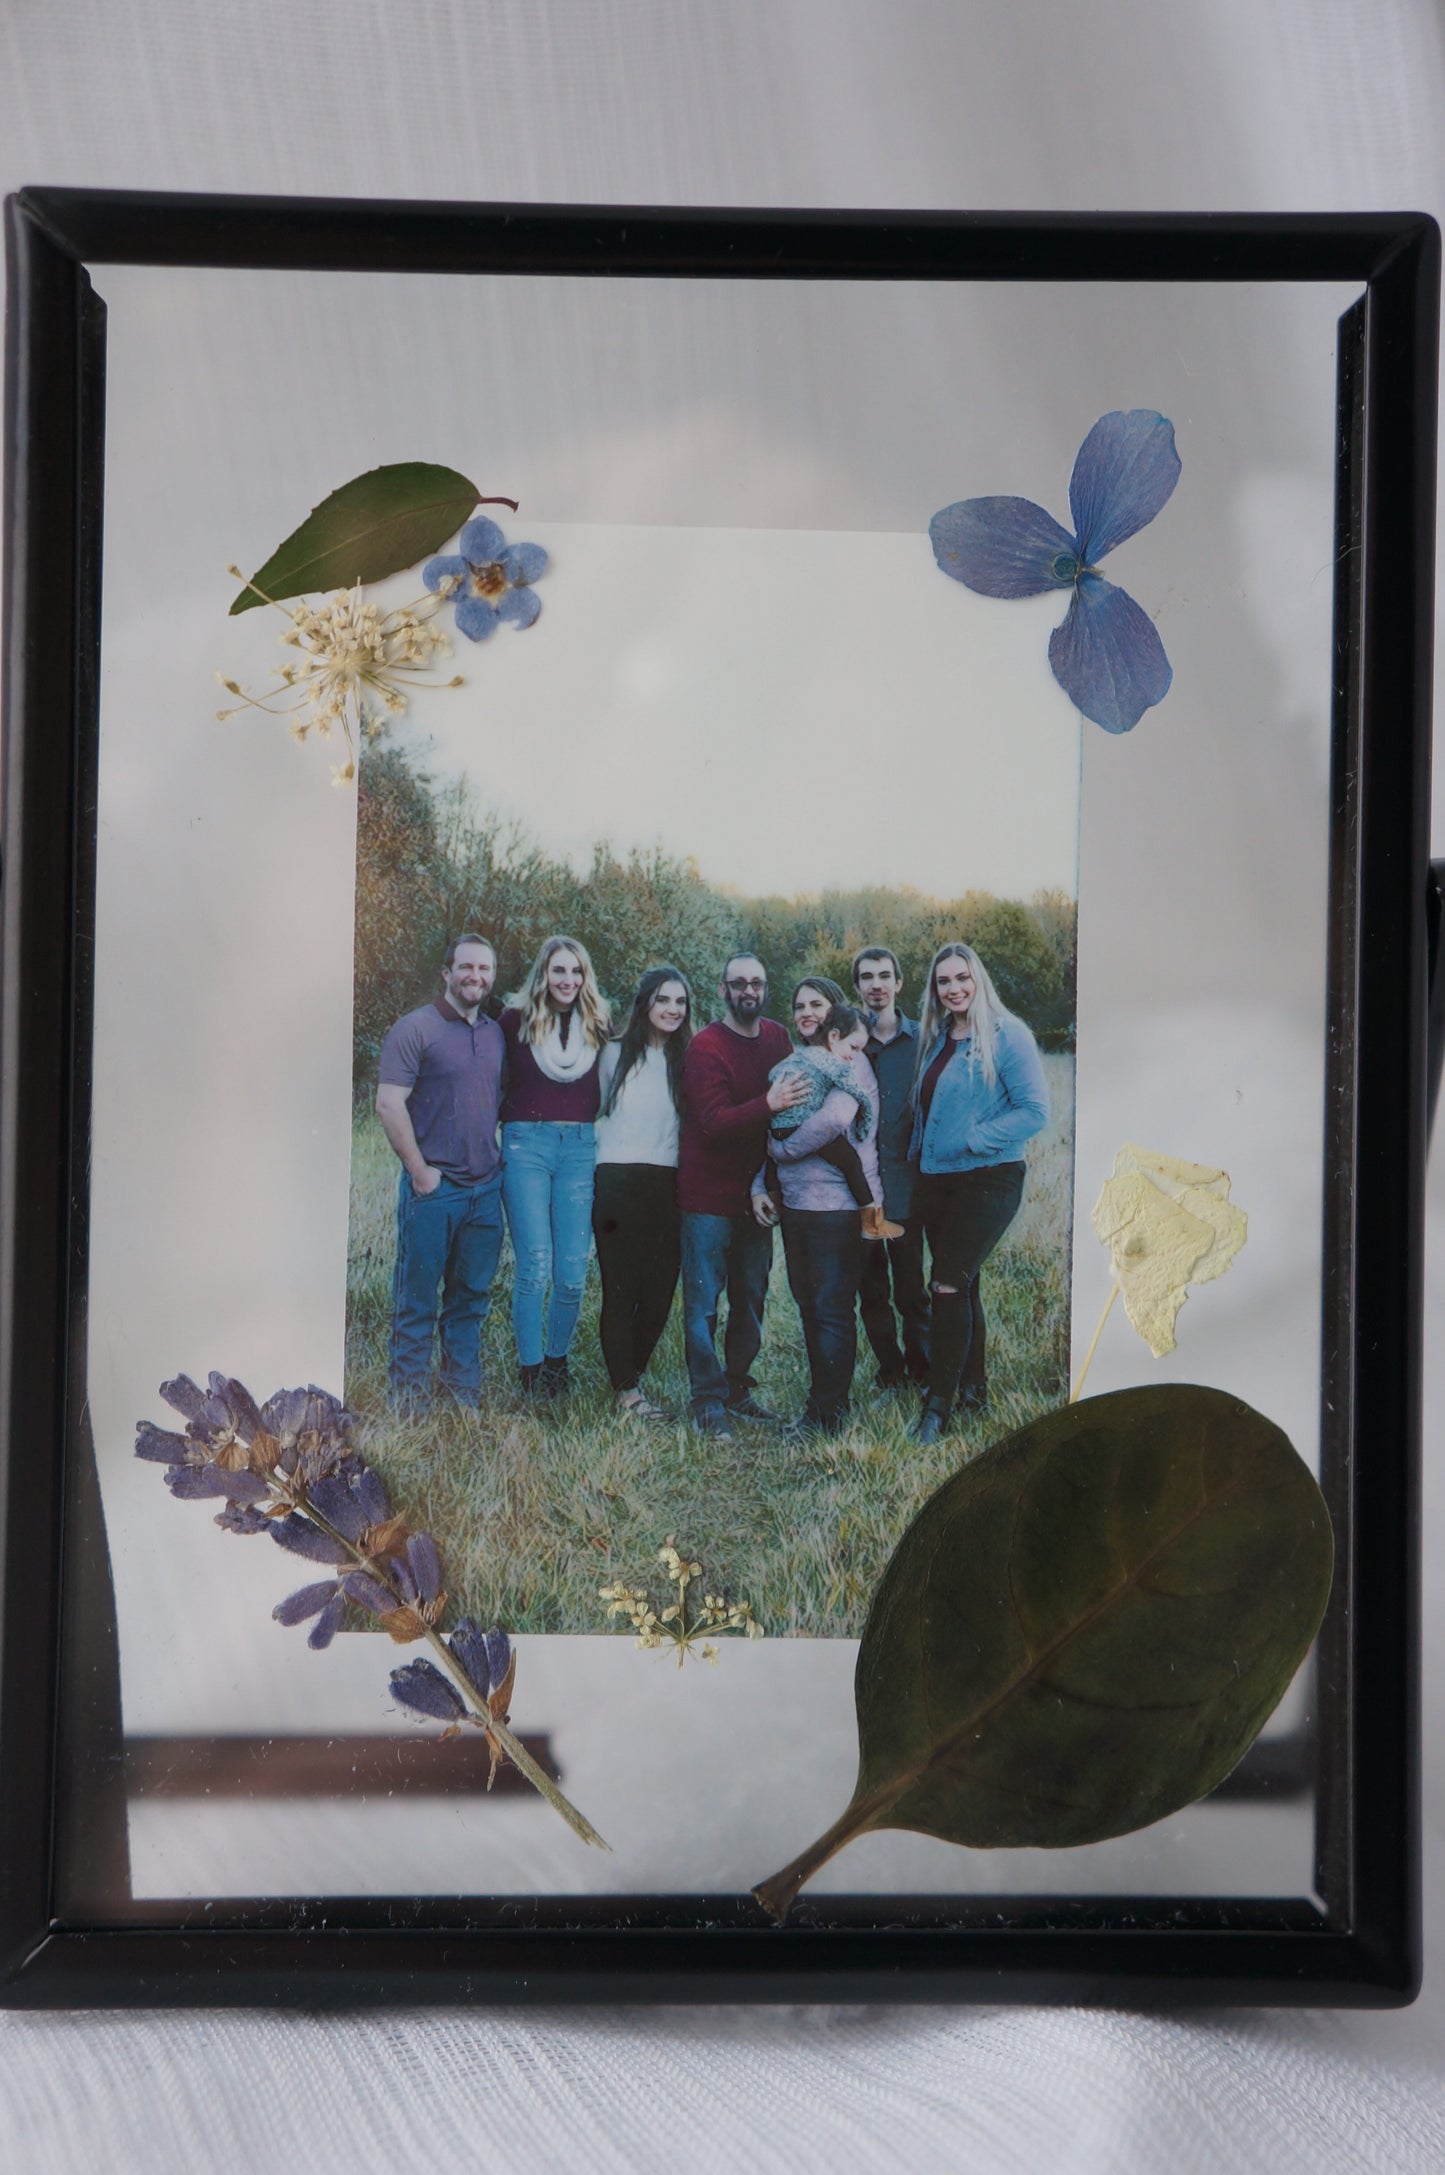 Small photo frame with flowers